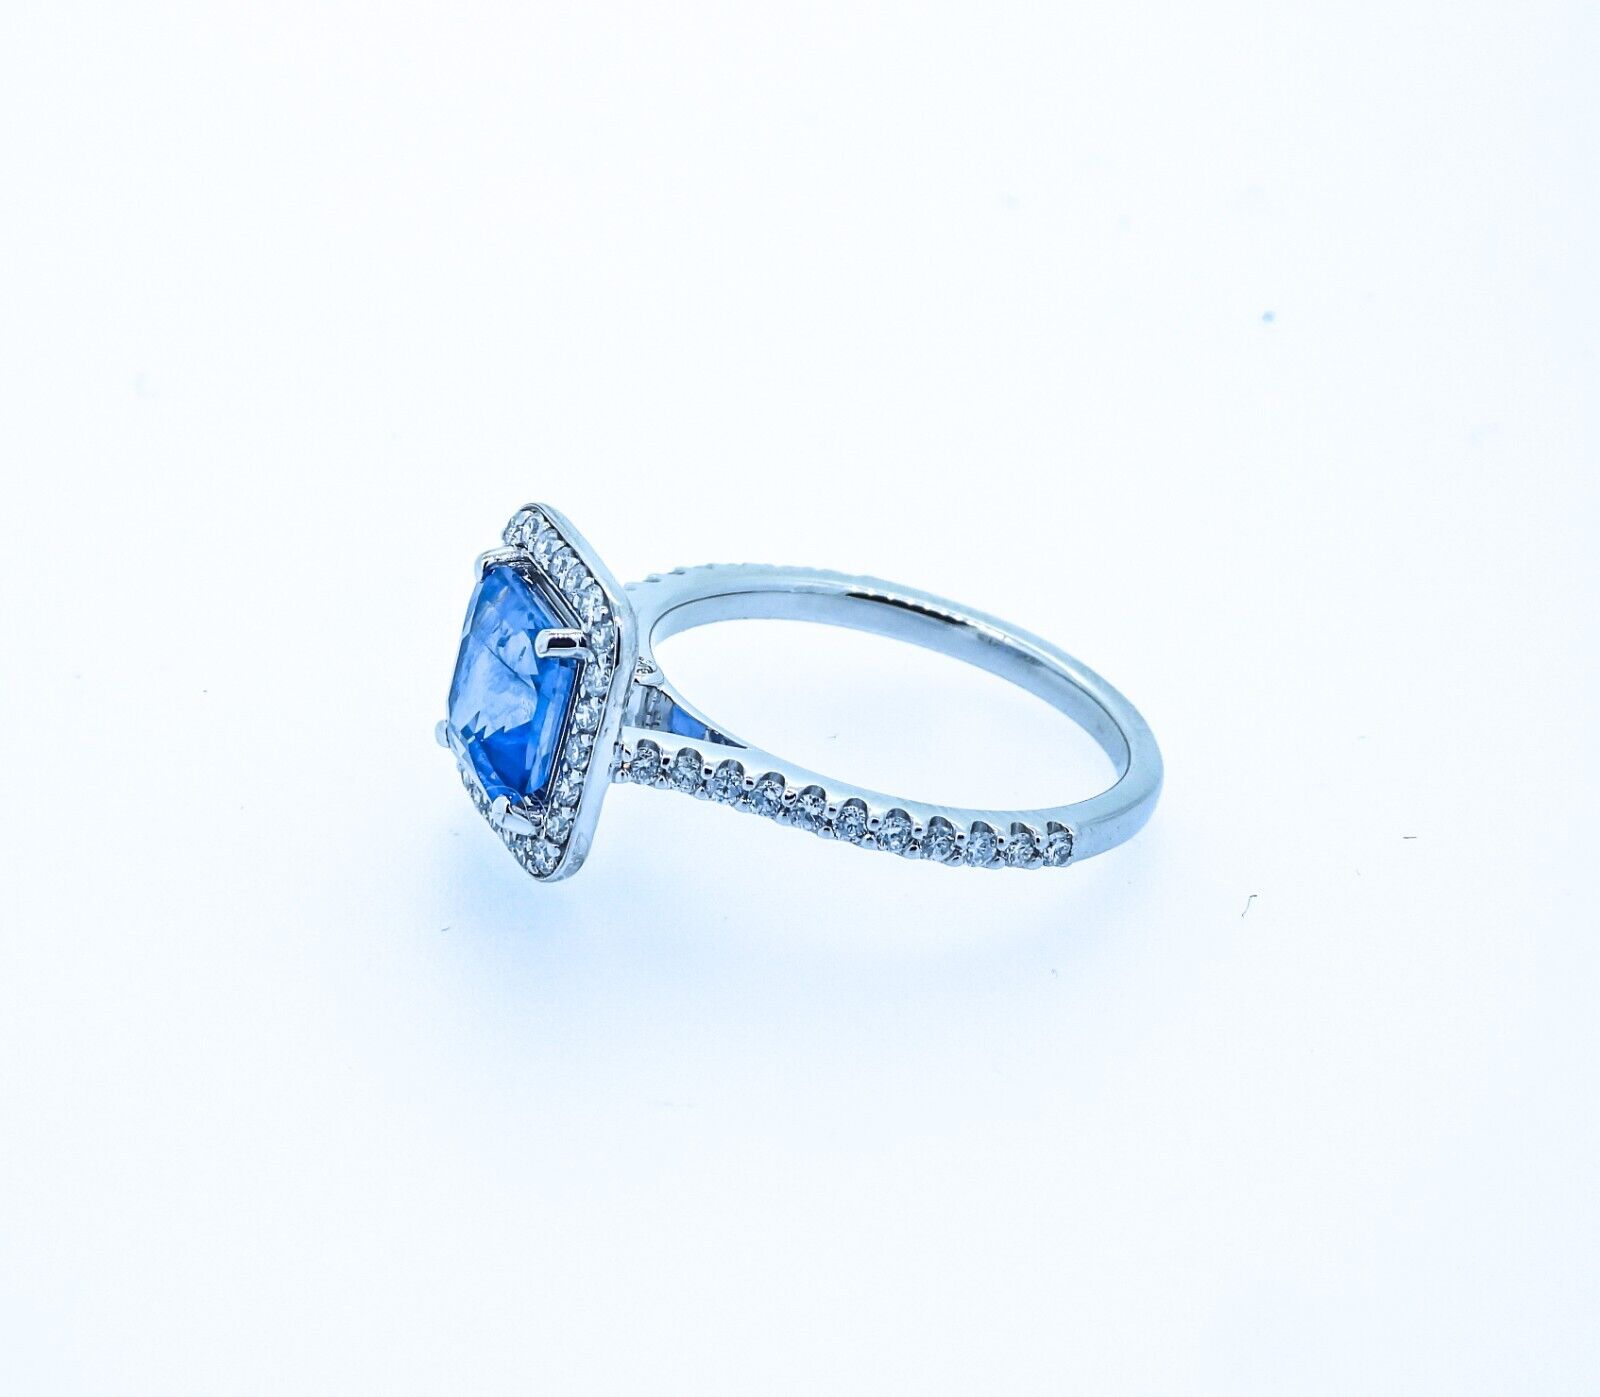 GIA Certified 2.23ct Blue Colour Change VS Untreated Sapphire & Diamonds Ring - Image 4 of 6